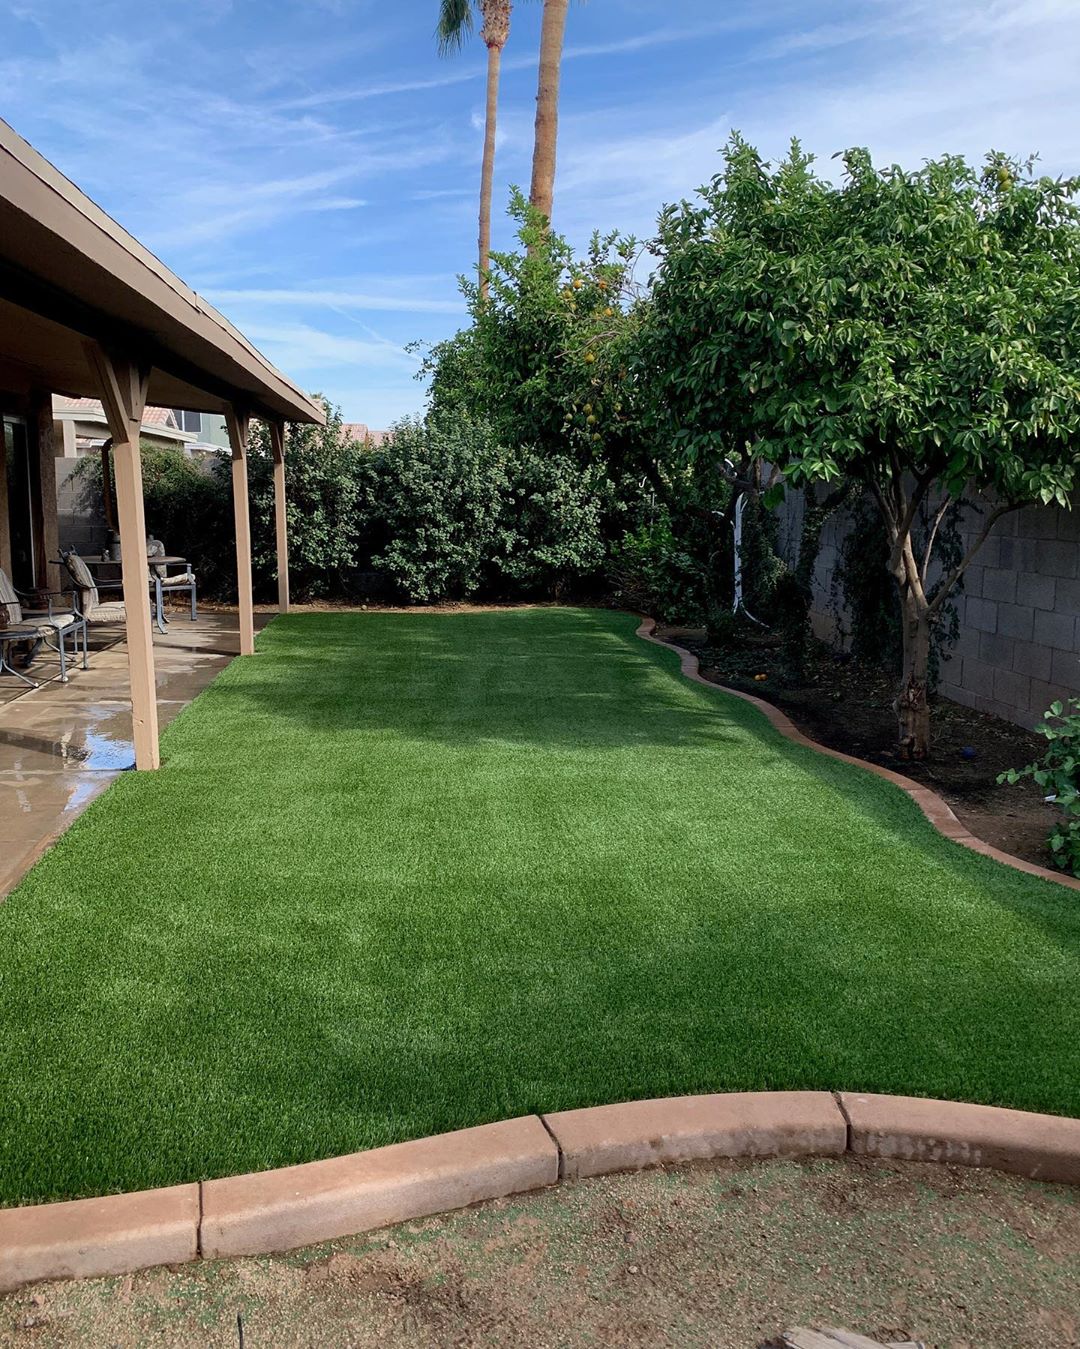 5 Incredibly Useful Sloped Backyard Grading Tips For Small Businesses